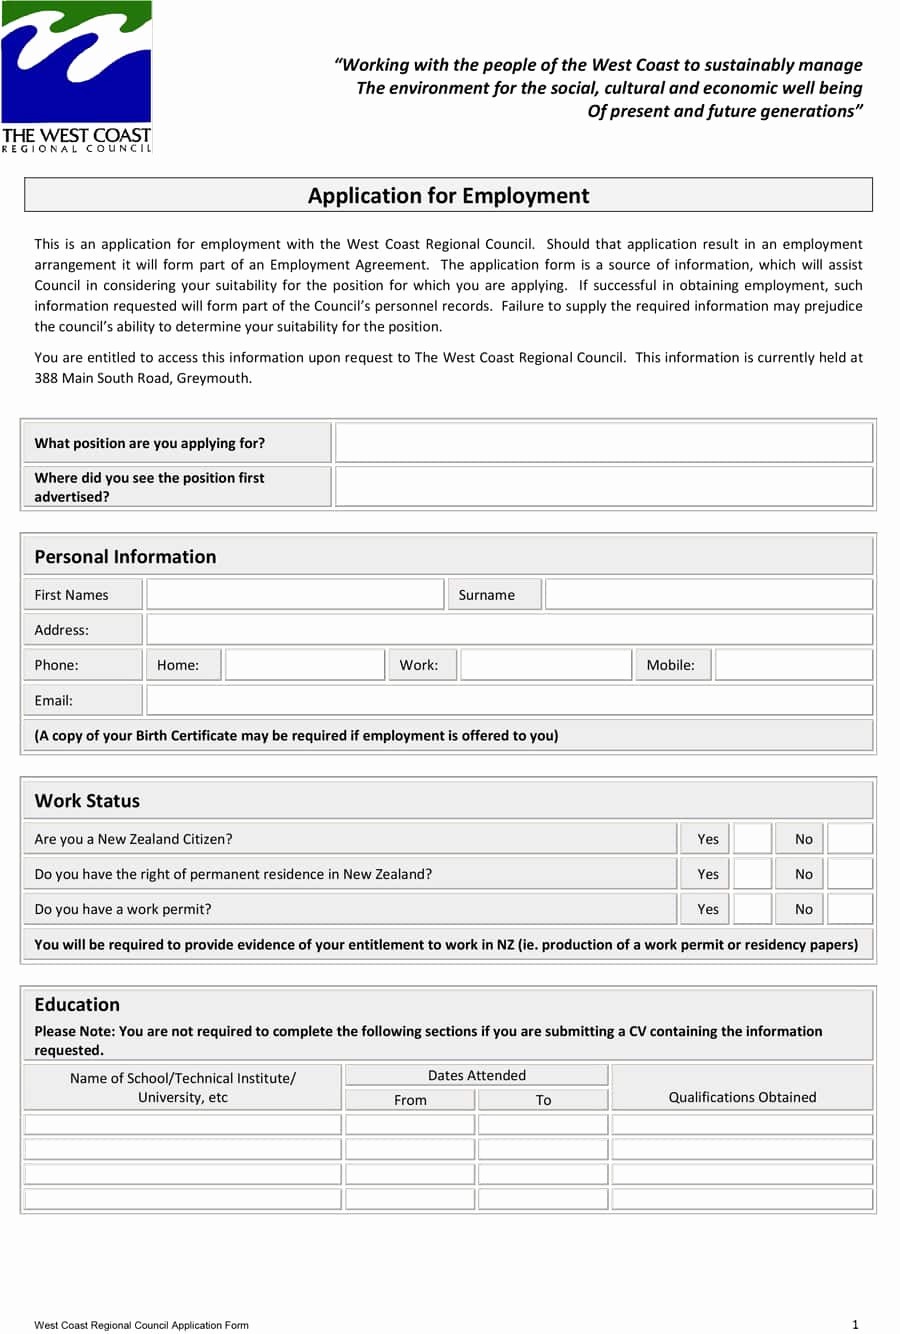 Free Employment Application form Template Luxury 50 Free Employment Job Application form Templates